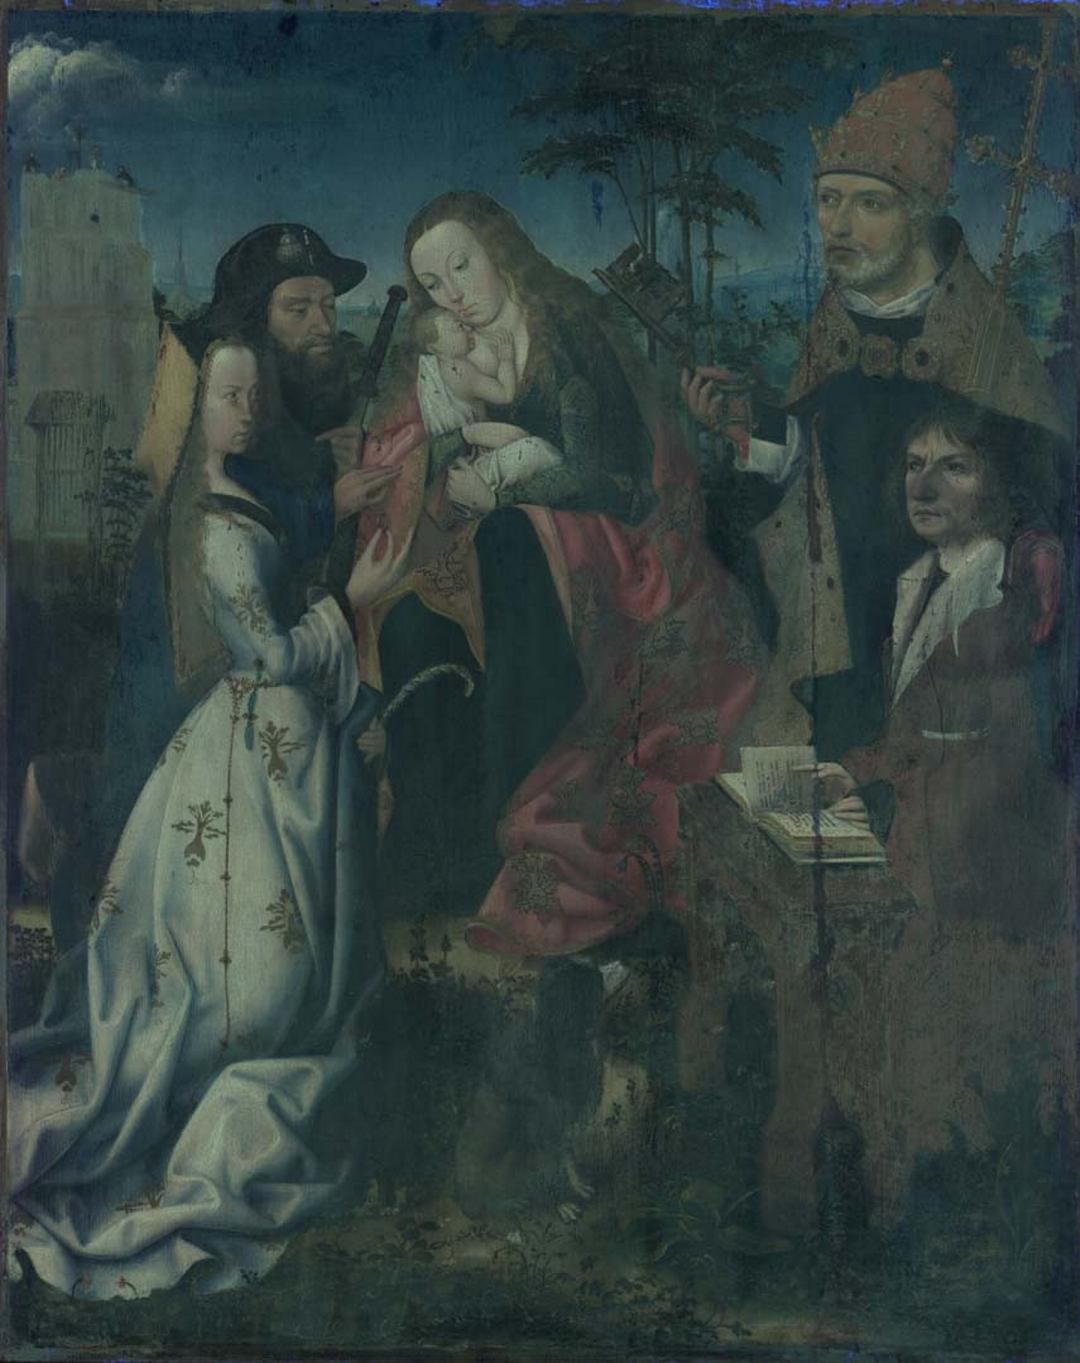 Virgin and Child with Saint James the Pilgrim, Saint Catherine and the Donor with Saint Peter c.1496